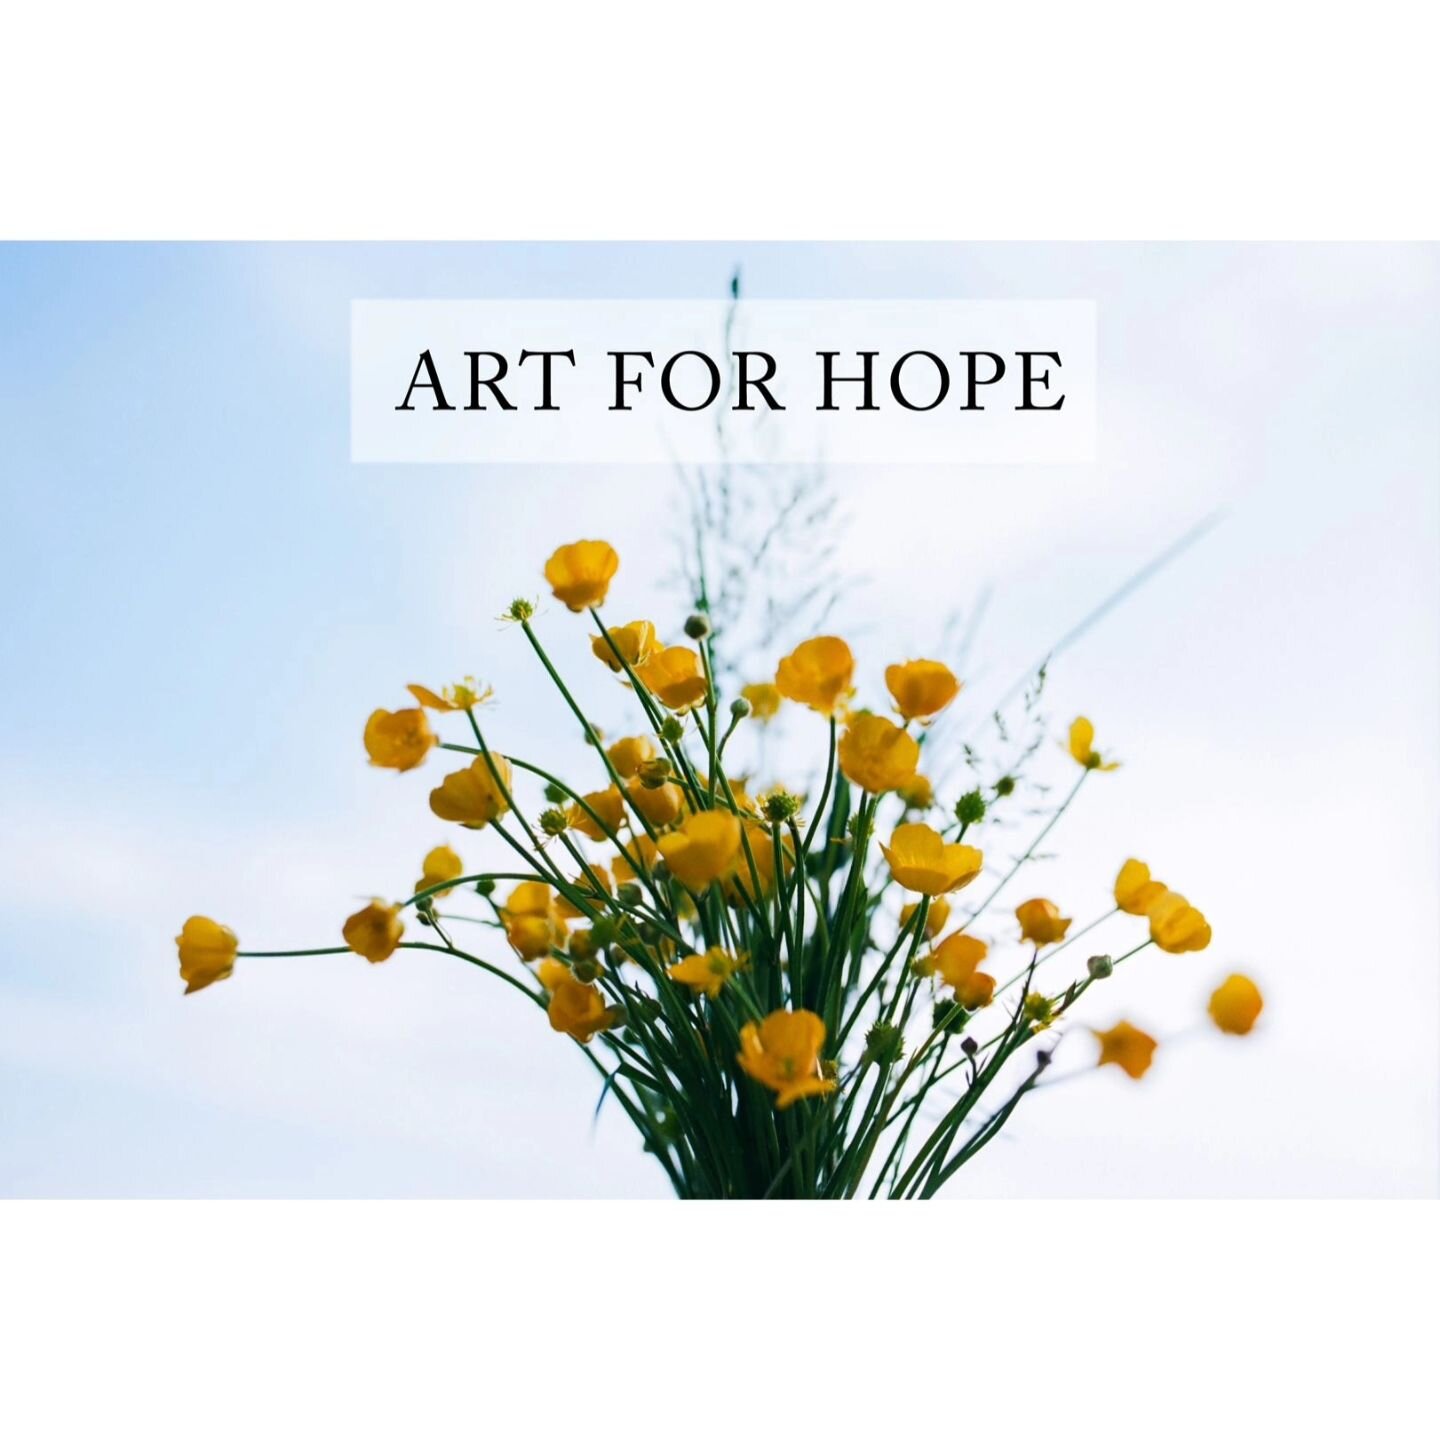 A huge thank you to all those that booked ART FOR HOPE family sessions. In just a few days, &pound;1800 have been donated to organisations providing emergency assistance to families and animals in Gaza.

Sharing this experience with you is hopefully 